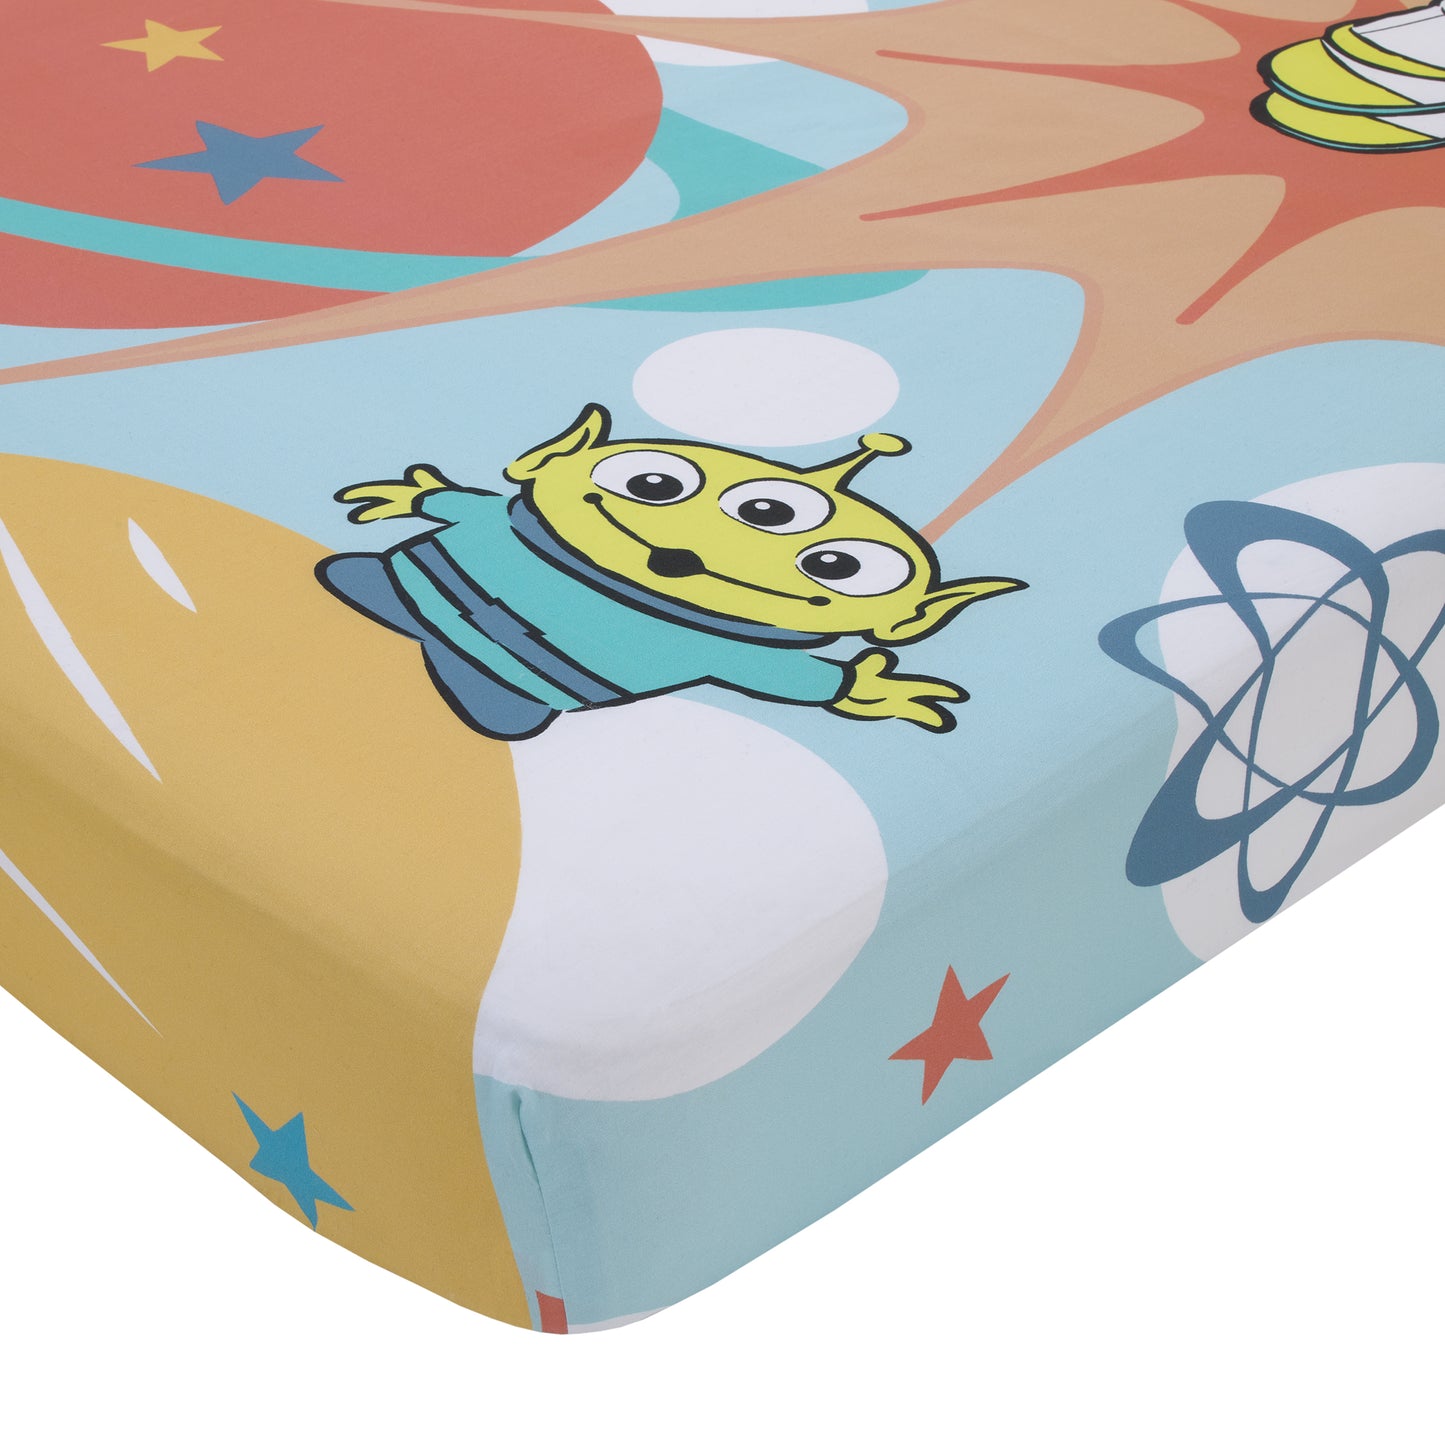 Disney Toy Story Buzz Lightyear Blue and Orange Blast Off To Infiniti and Beyond 100% Cotton Photo Op Fitted Crib Sheet